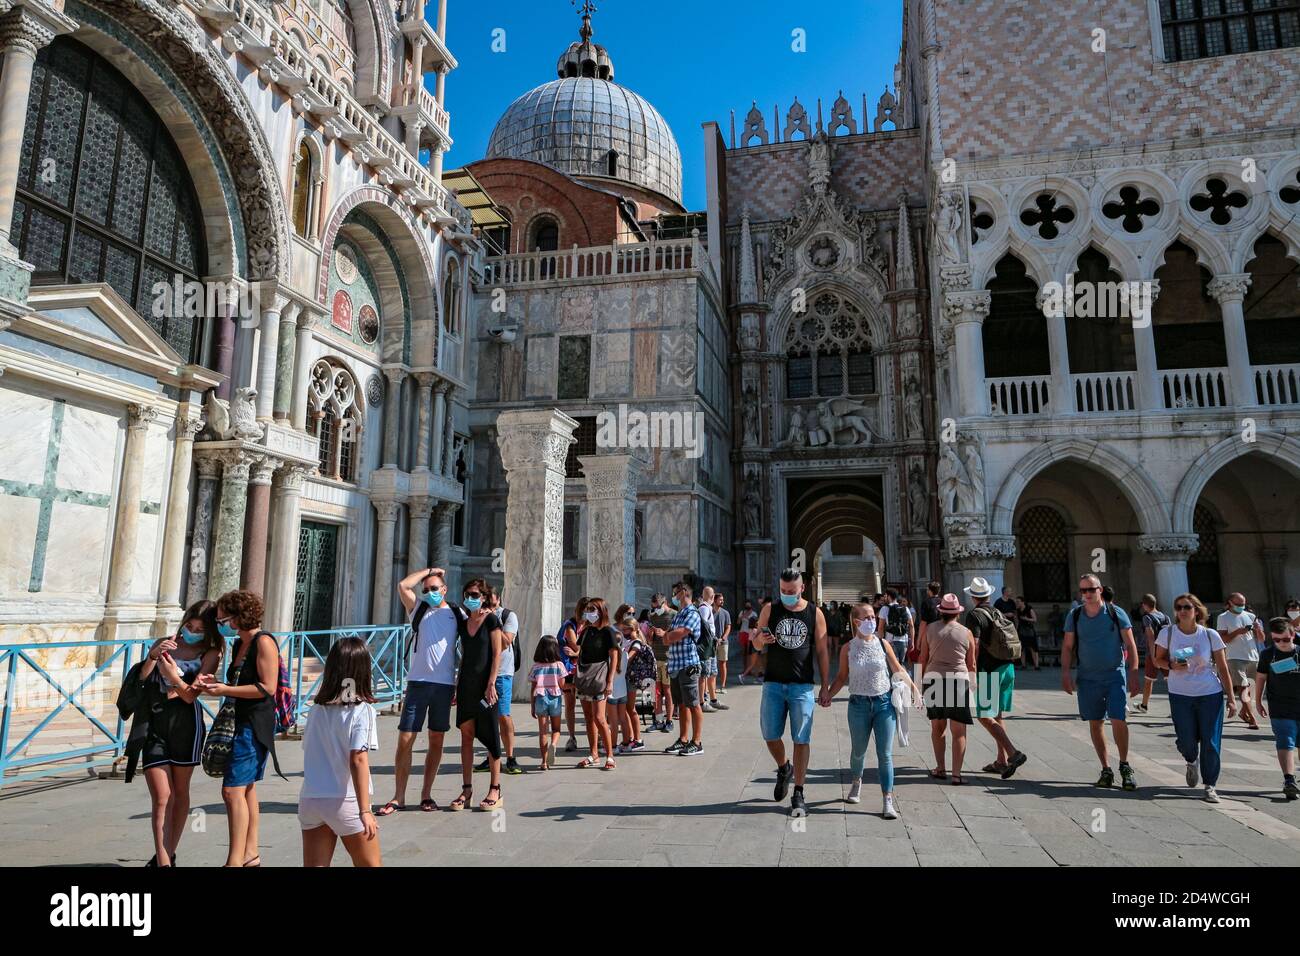 New normal tourism at Piazza San Marco (St. Mark's Square), Venice, Italy, during the coronavirus pandemic with tourists wearing face masks. Stock Photo